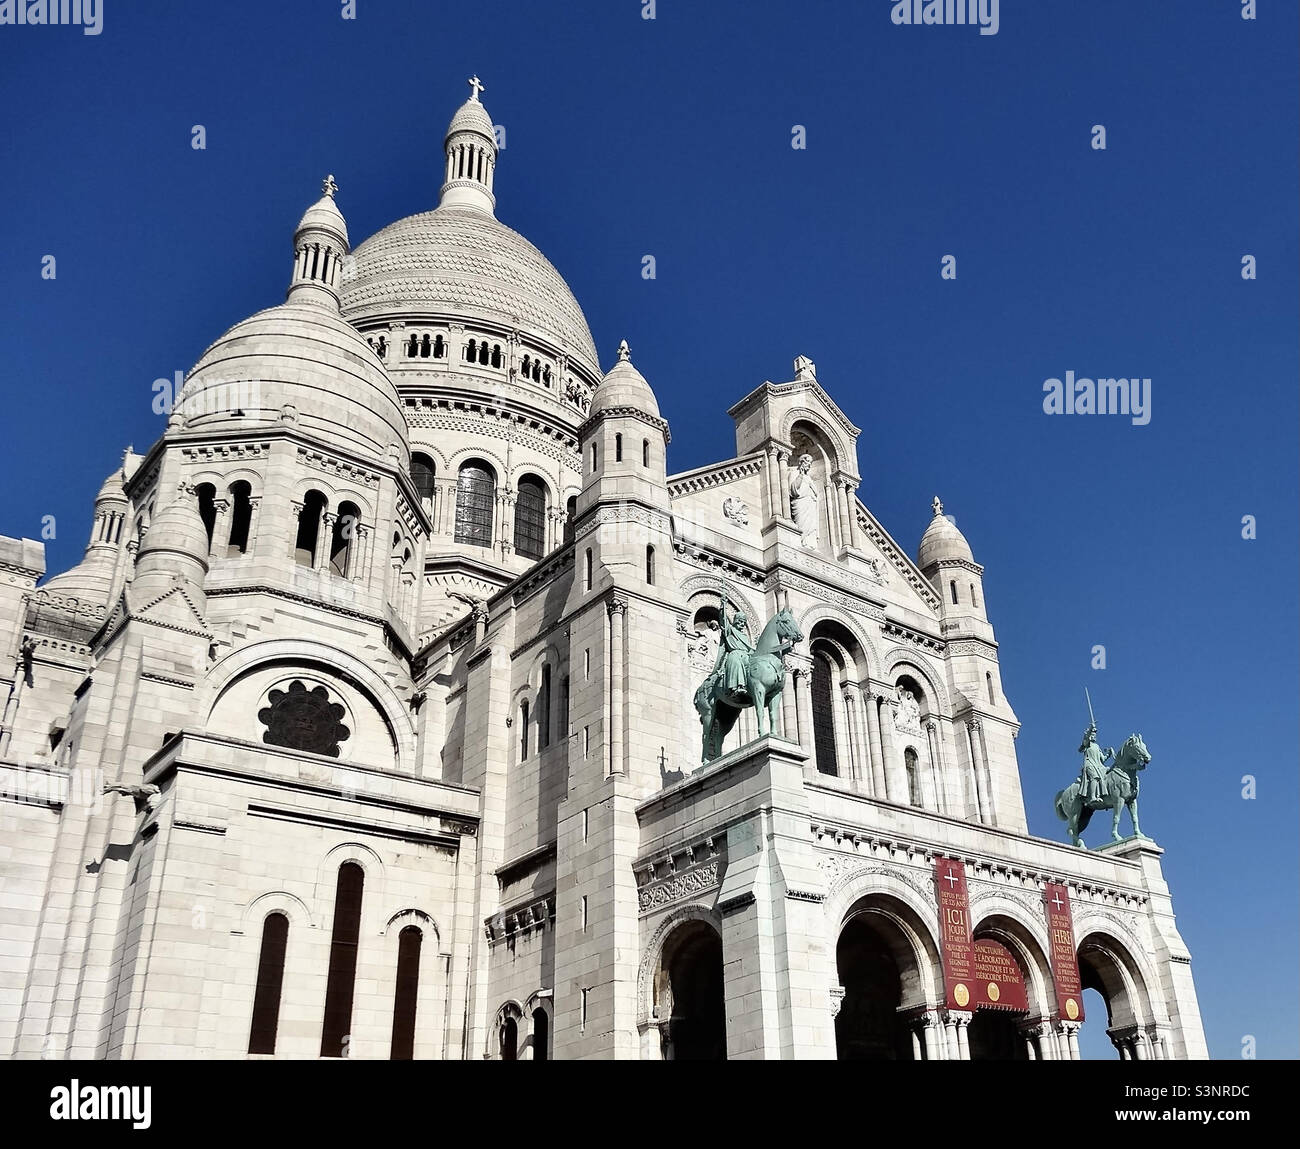 Sacre-Coeur Basilica (1875-1914), Montmartre, Paris, with the statues of Louis IX (L) and Joan of Arc (R). High up at 131m/430ft and with 5 domes, it was built on 83 pillars sunk 40m/131 ft deep. Stock Photo